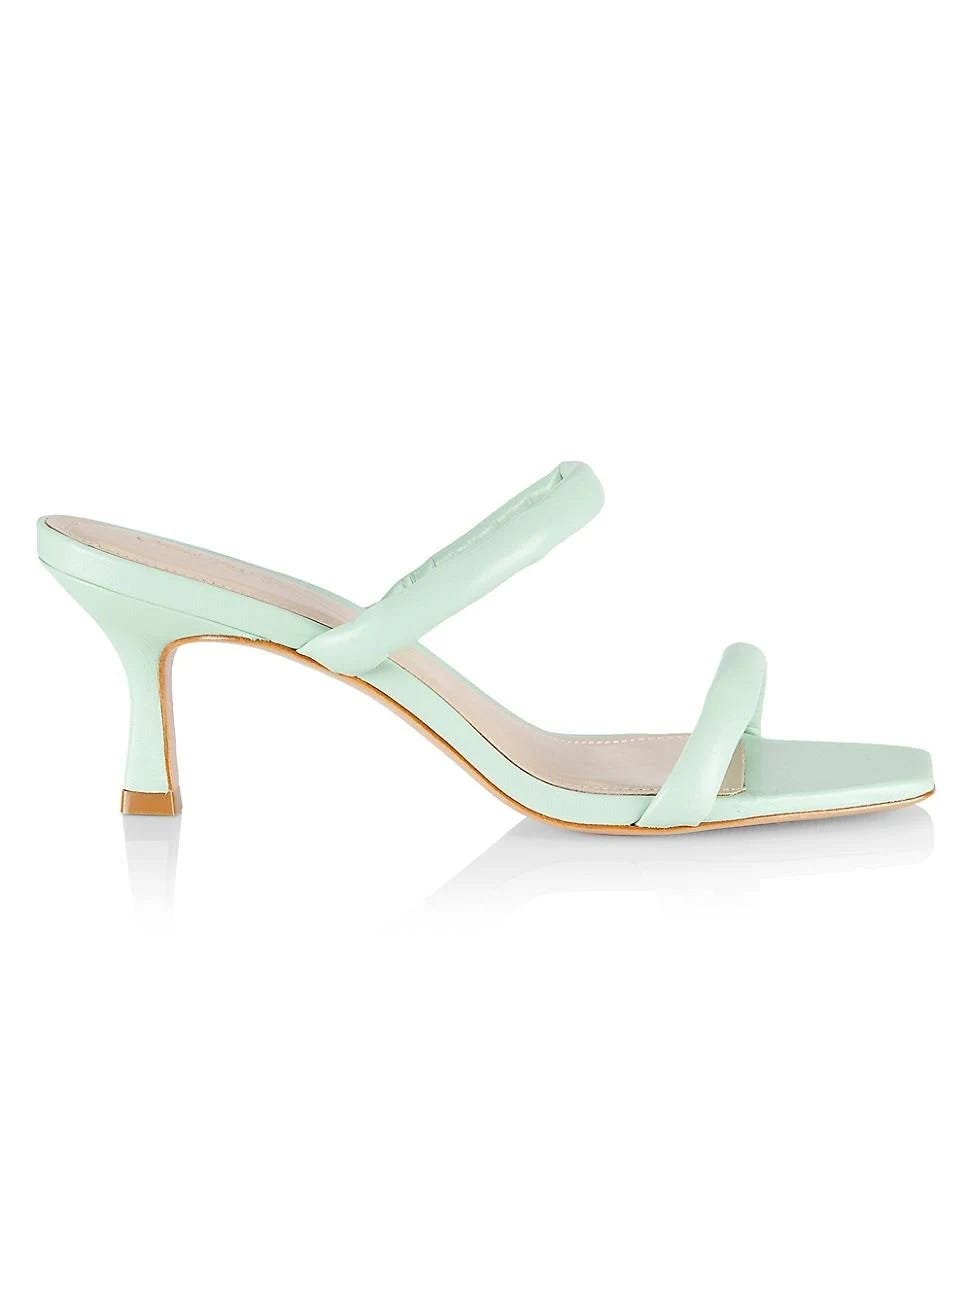 Comfortable Mint Leather Two-Strap Sandals with Padded Insole | Image